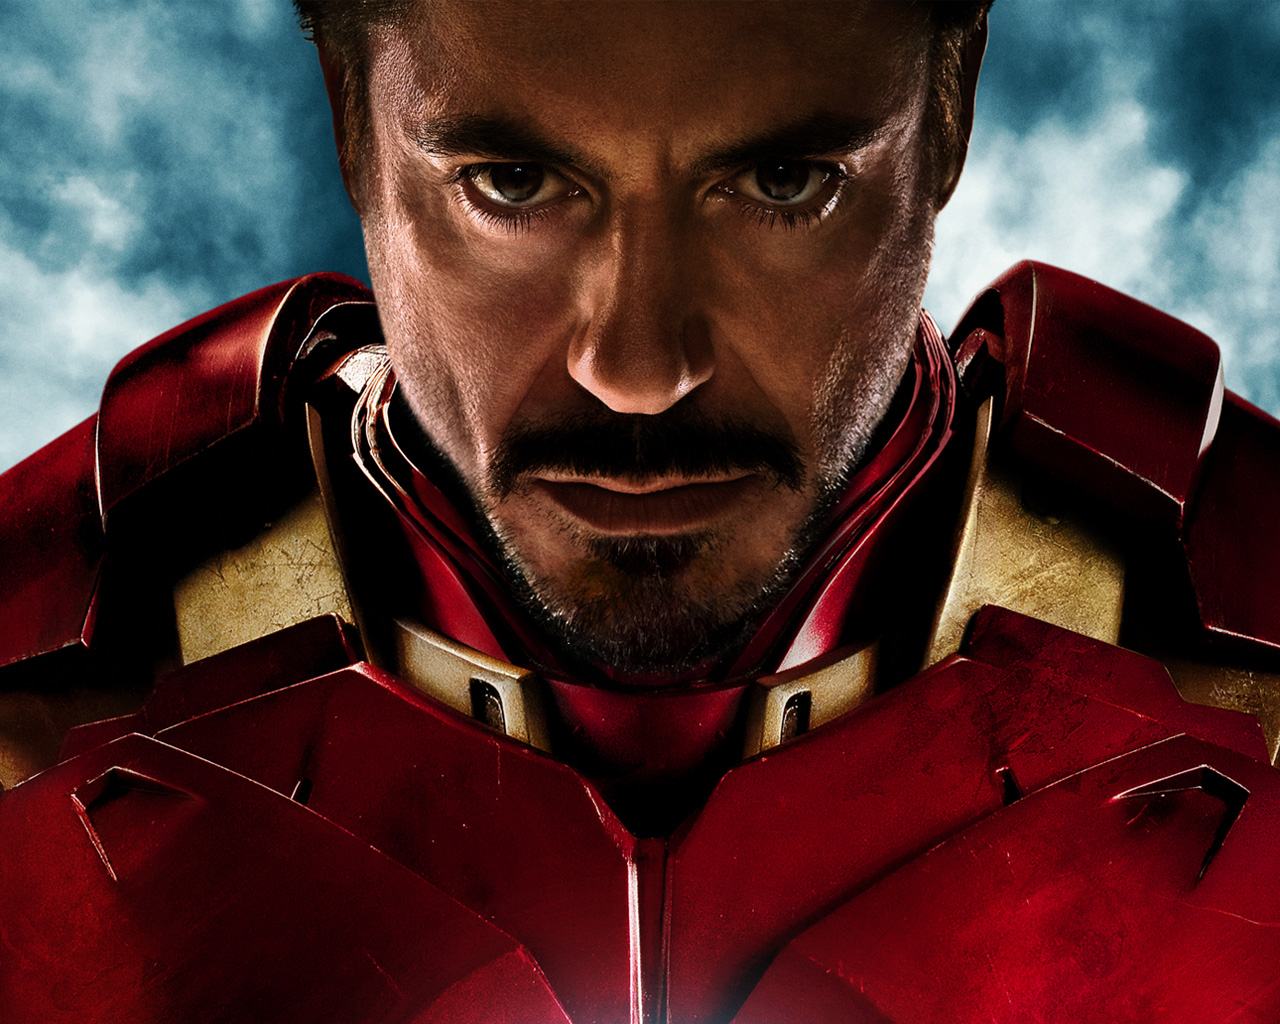 Geek insider, geekinsider, geekinsider. Com,, robert downey jr. Says yes to iron man 4, entertainment